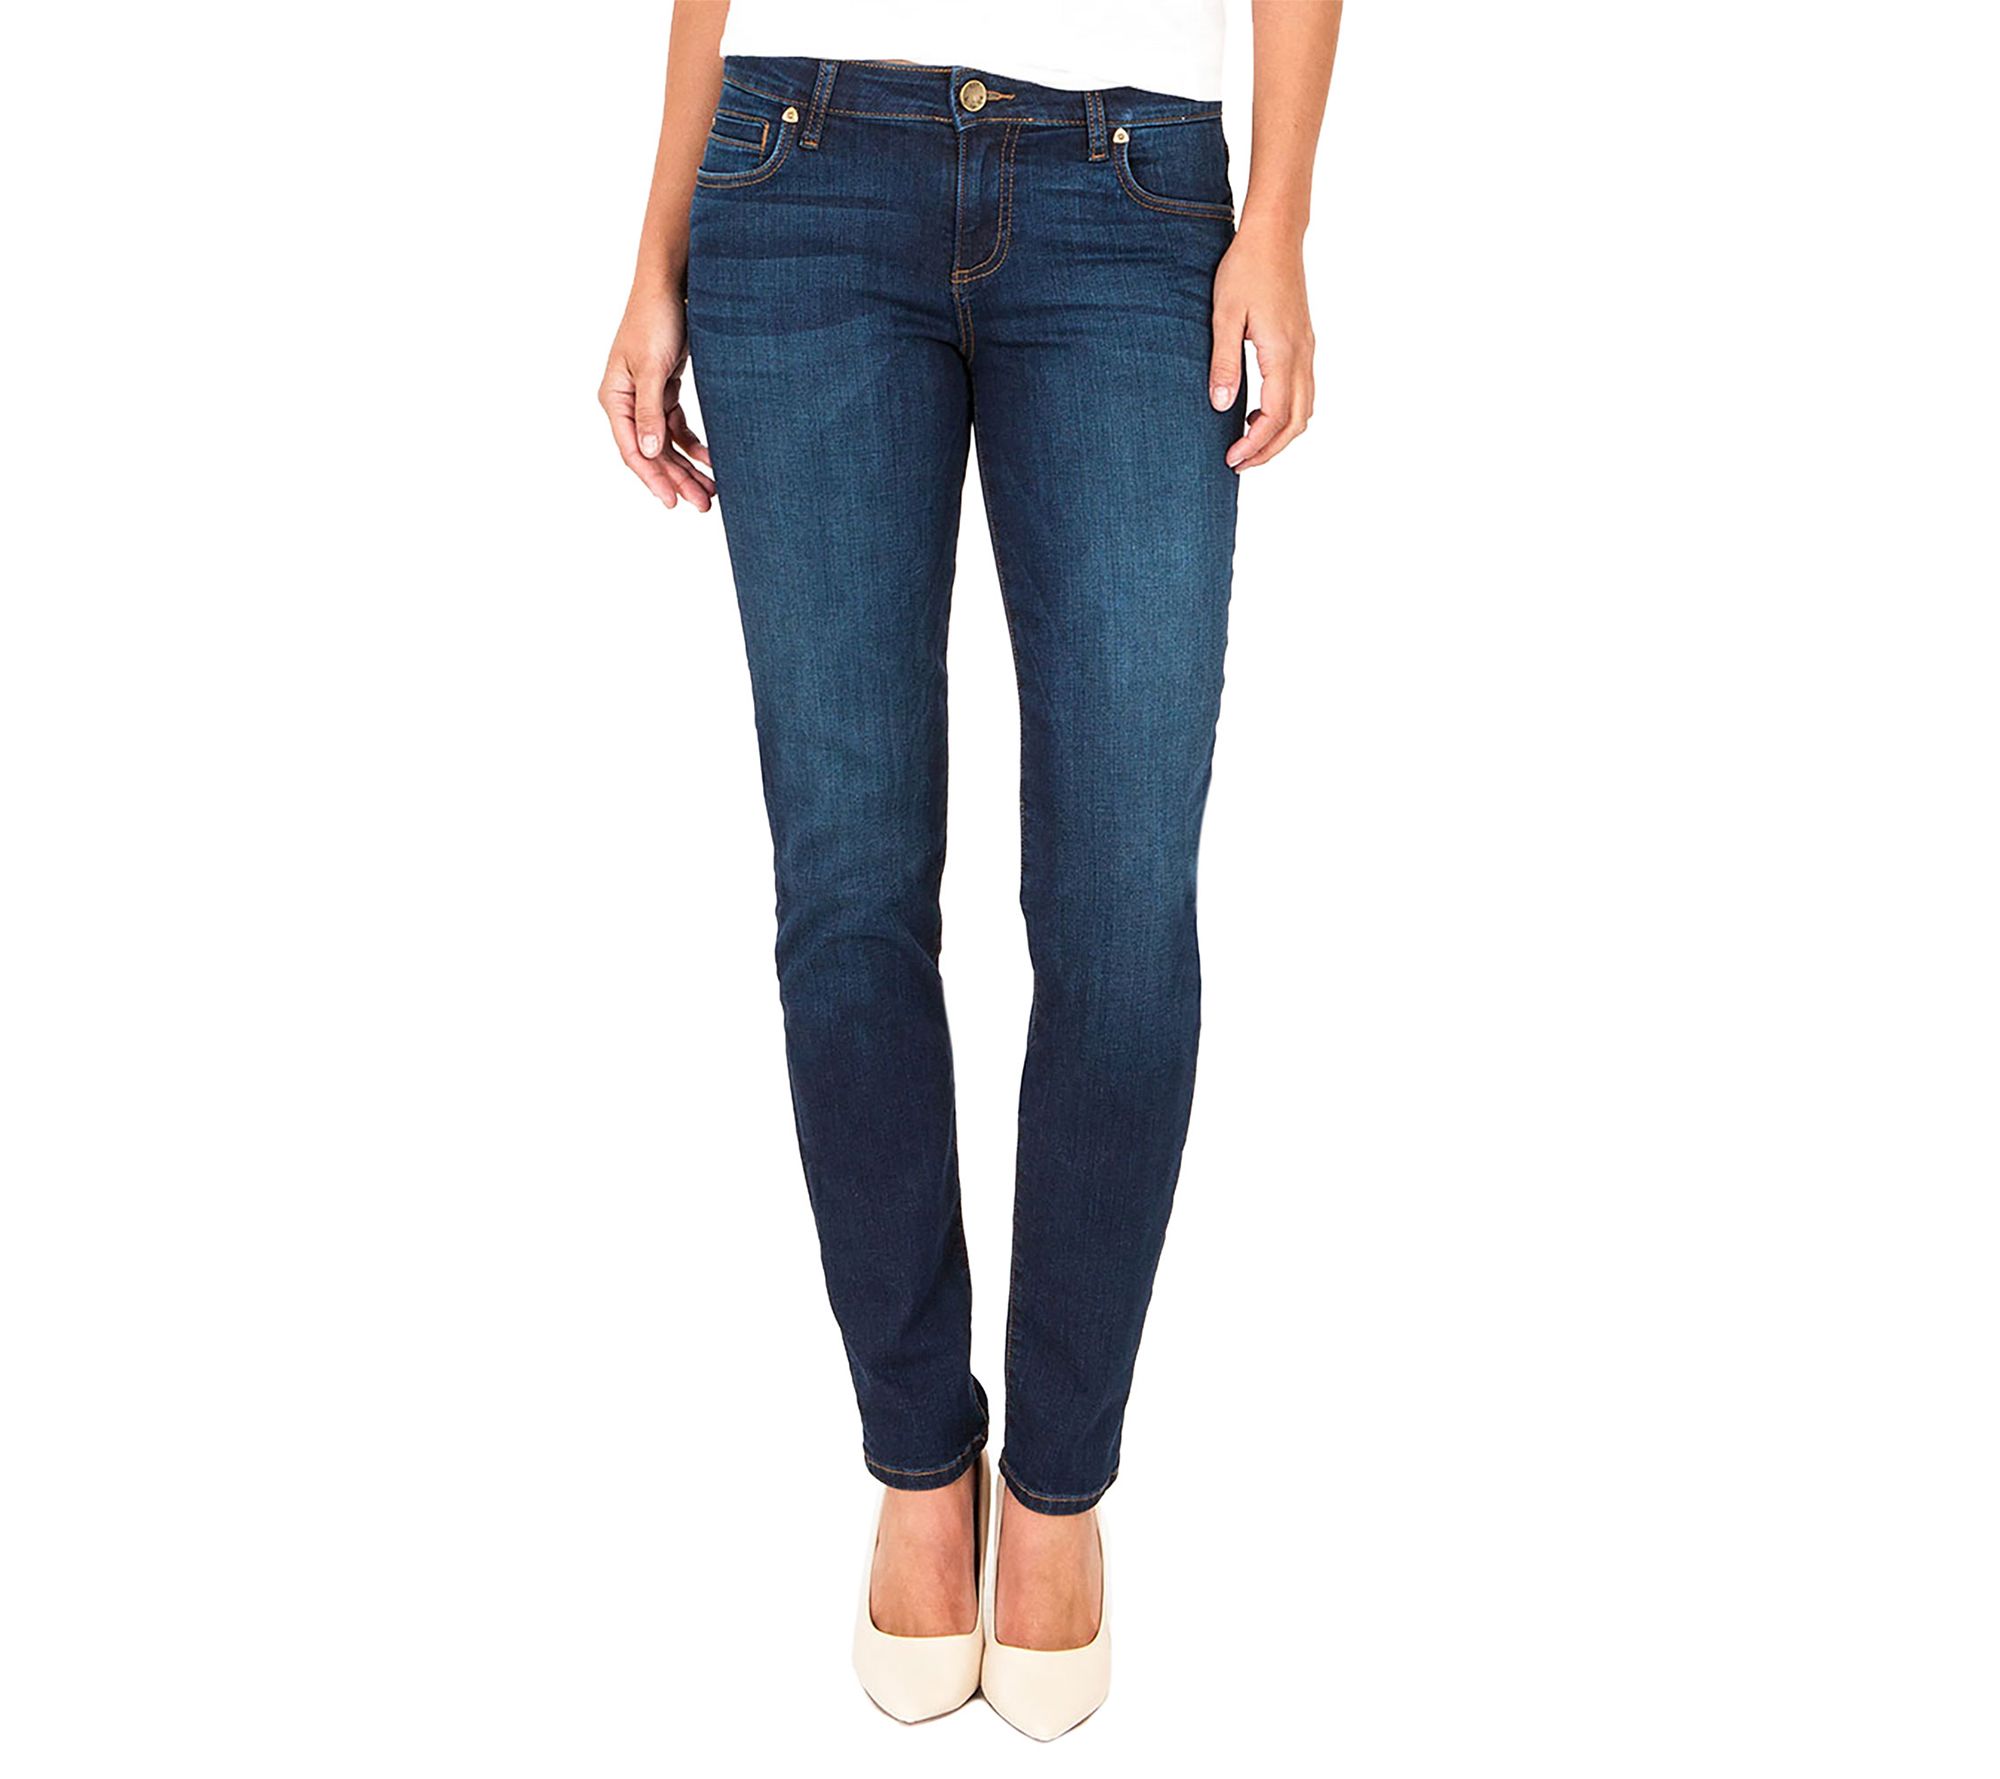 KUT from the Kloth Mid-Rise Diana Skinny Jeans - Systematic - QVC.com